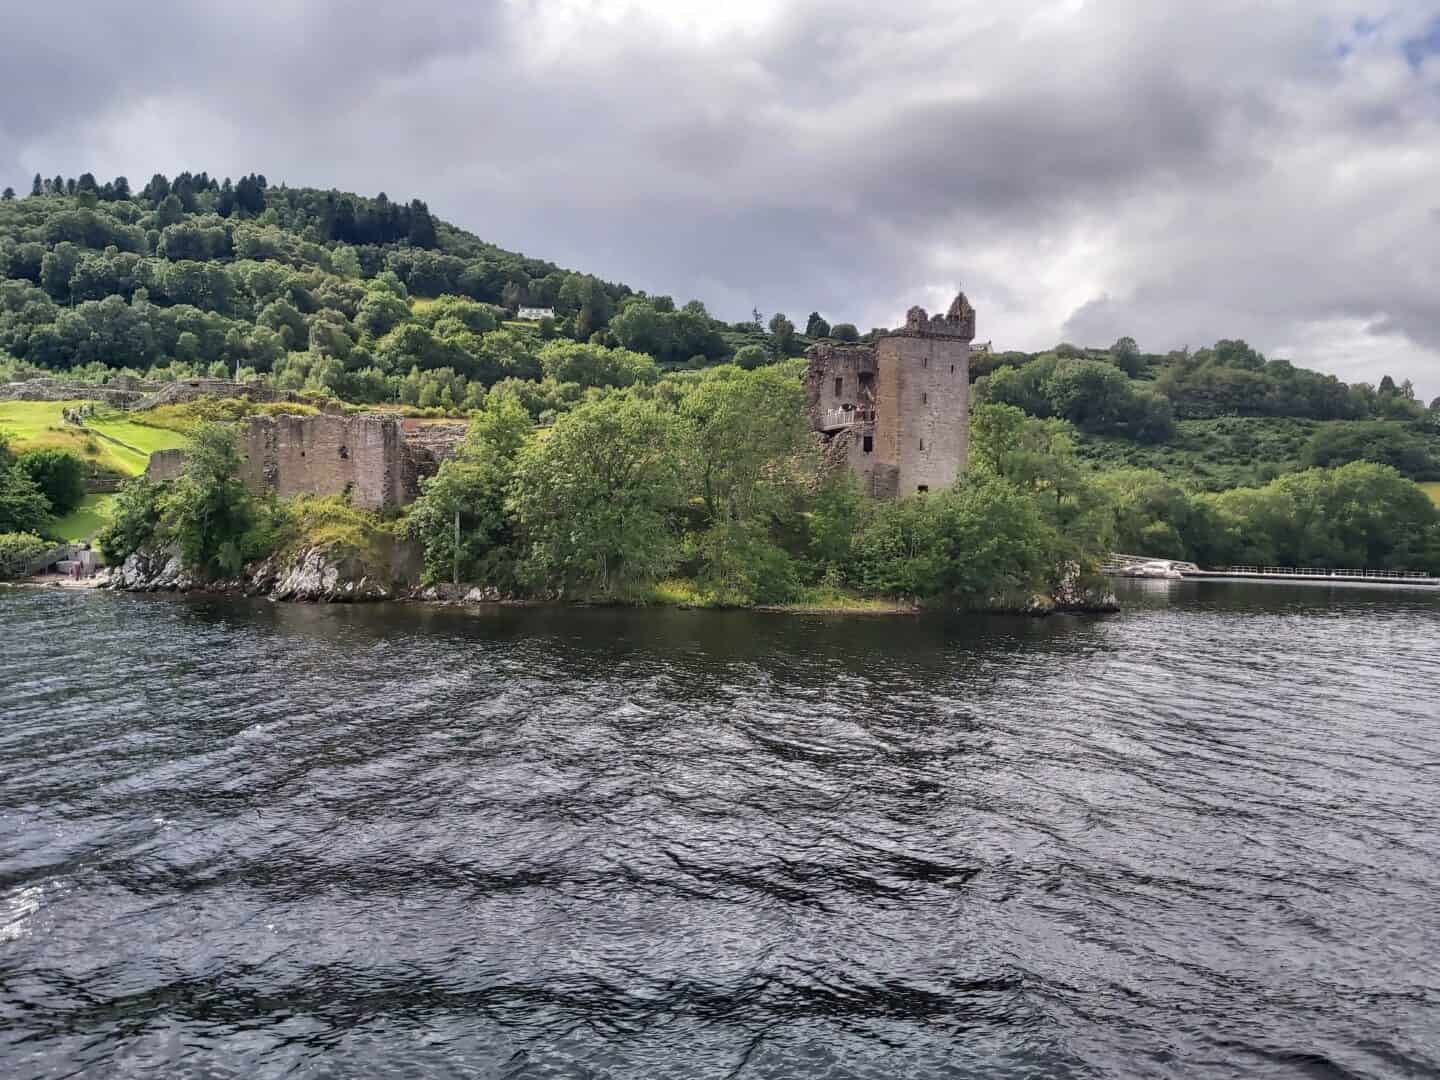 Urquhart Castle on Loch Ness. Photo taken from a boat with loch in foreground.  